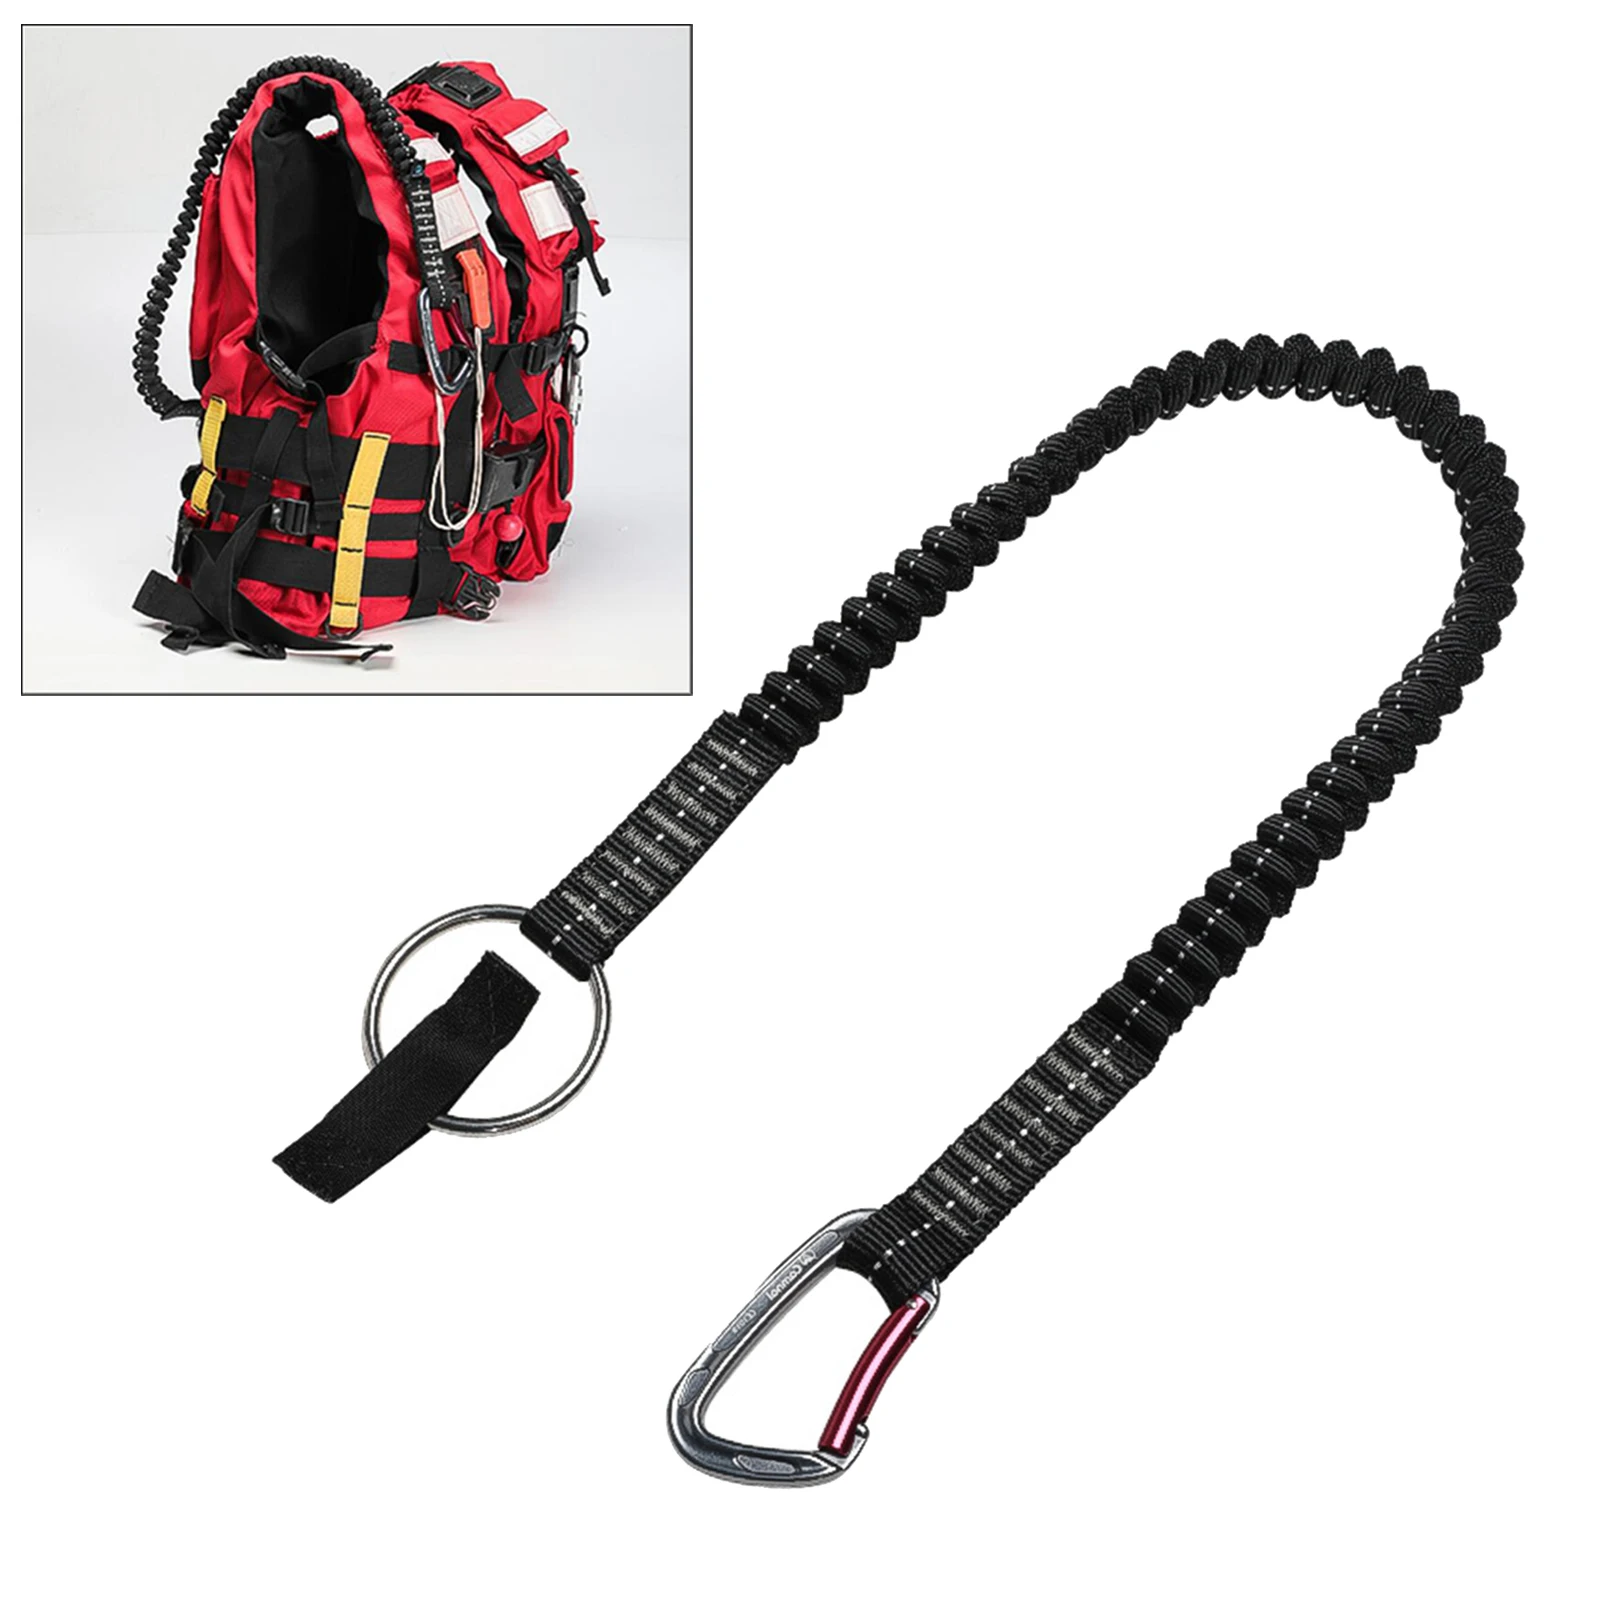 Climbing Ascender Sling Abseiling Attachment Accessories for Climbers